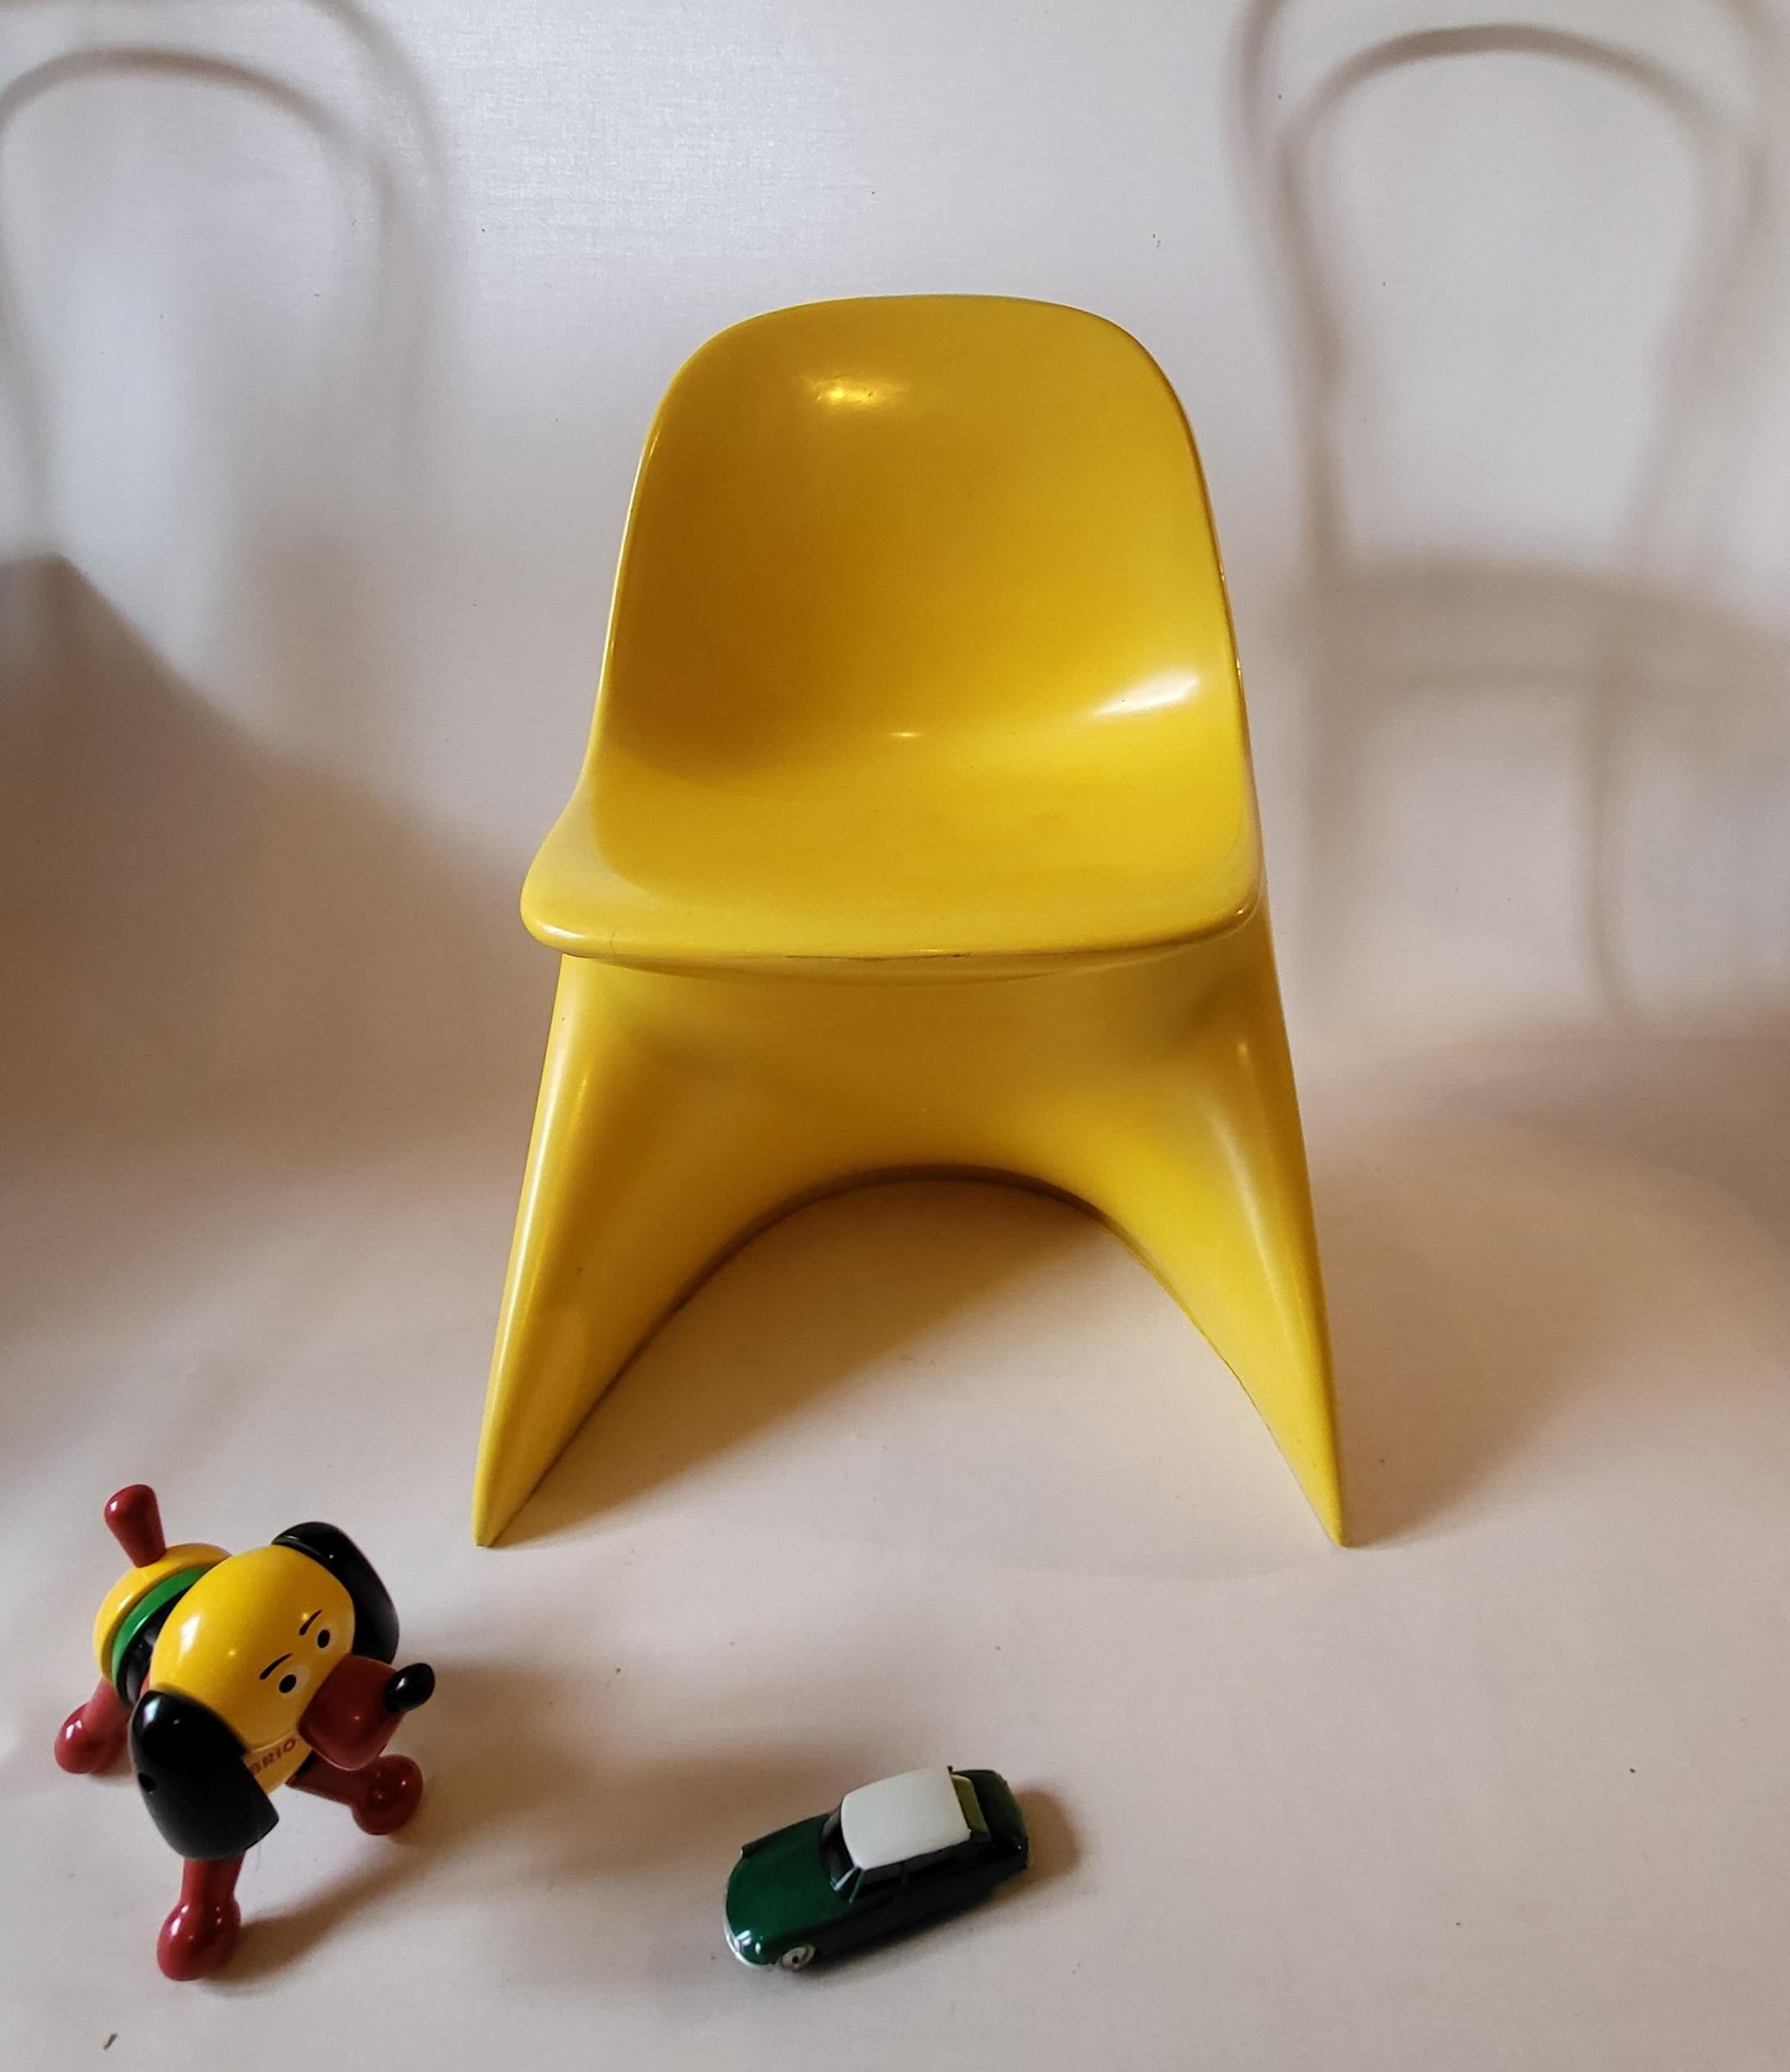 Italian Pair of Casalino Childrens Chair by Alexander Begge for Casala 70ies Italy